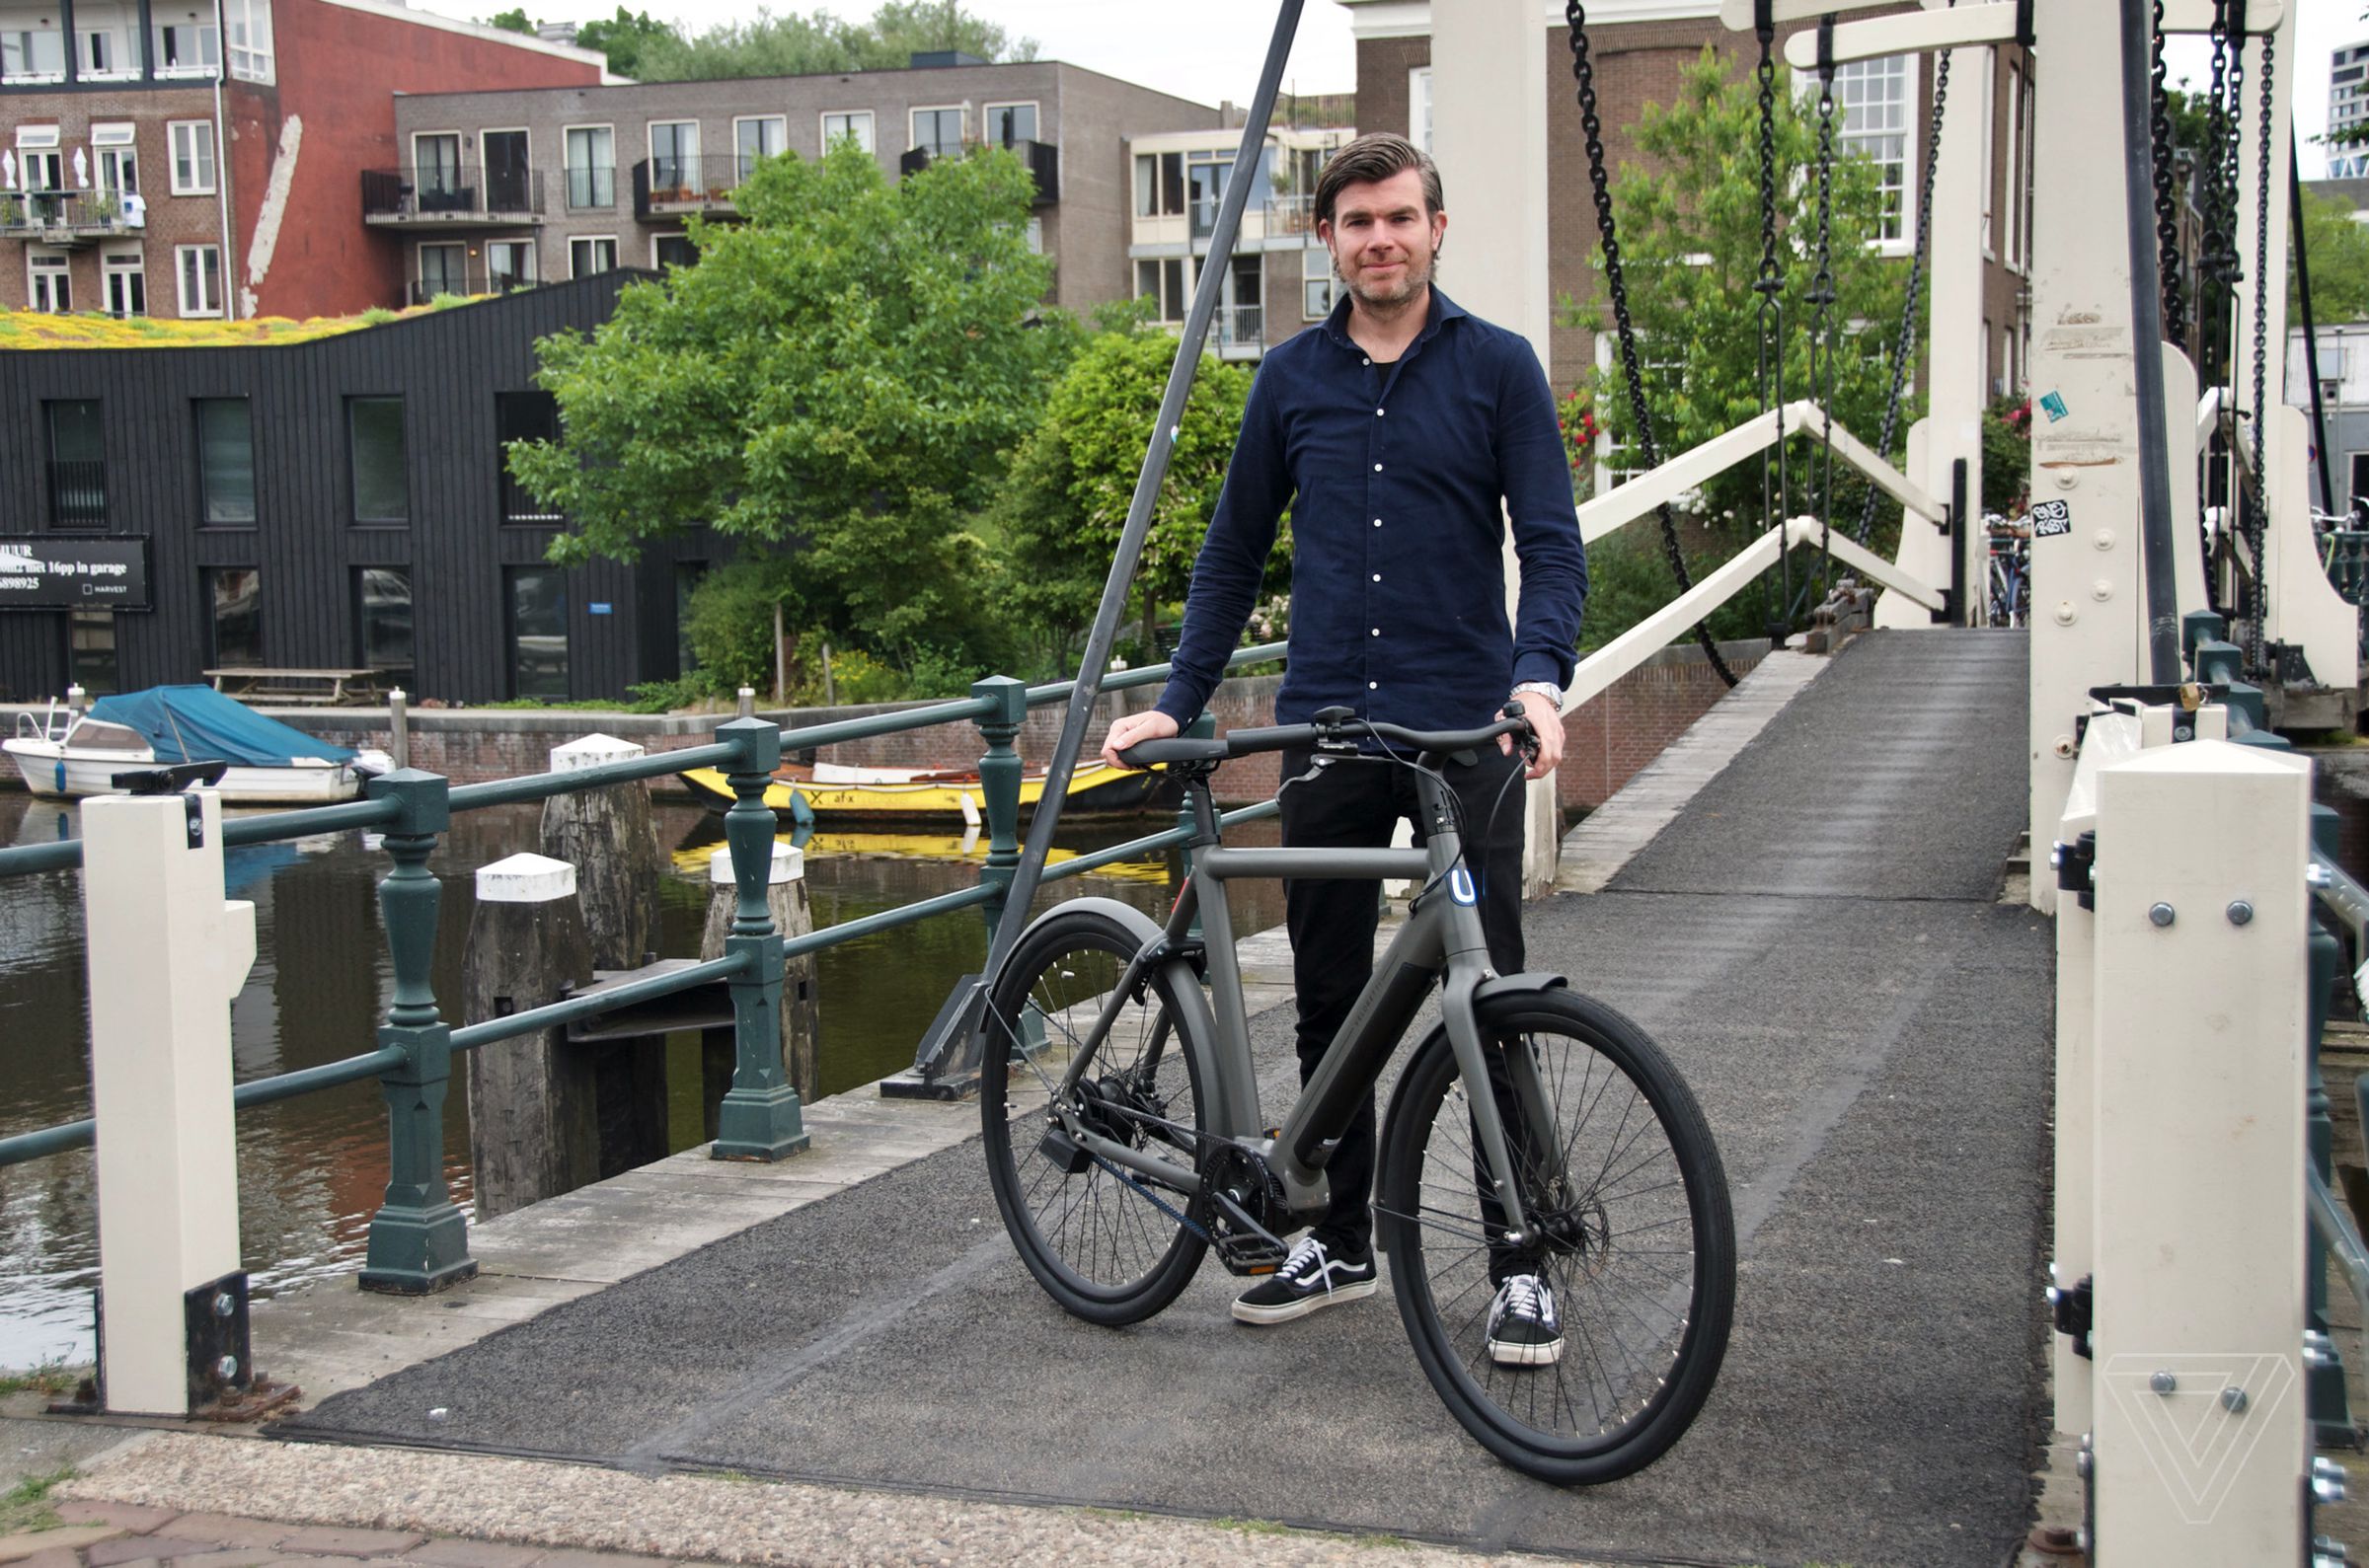 Veloretti founder Ferry Zonder and an Ace e-bike prototype in Amsterdam. He’s very, very tall.